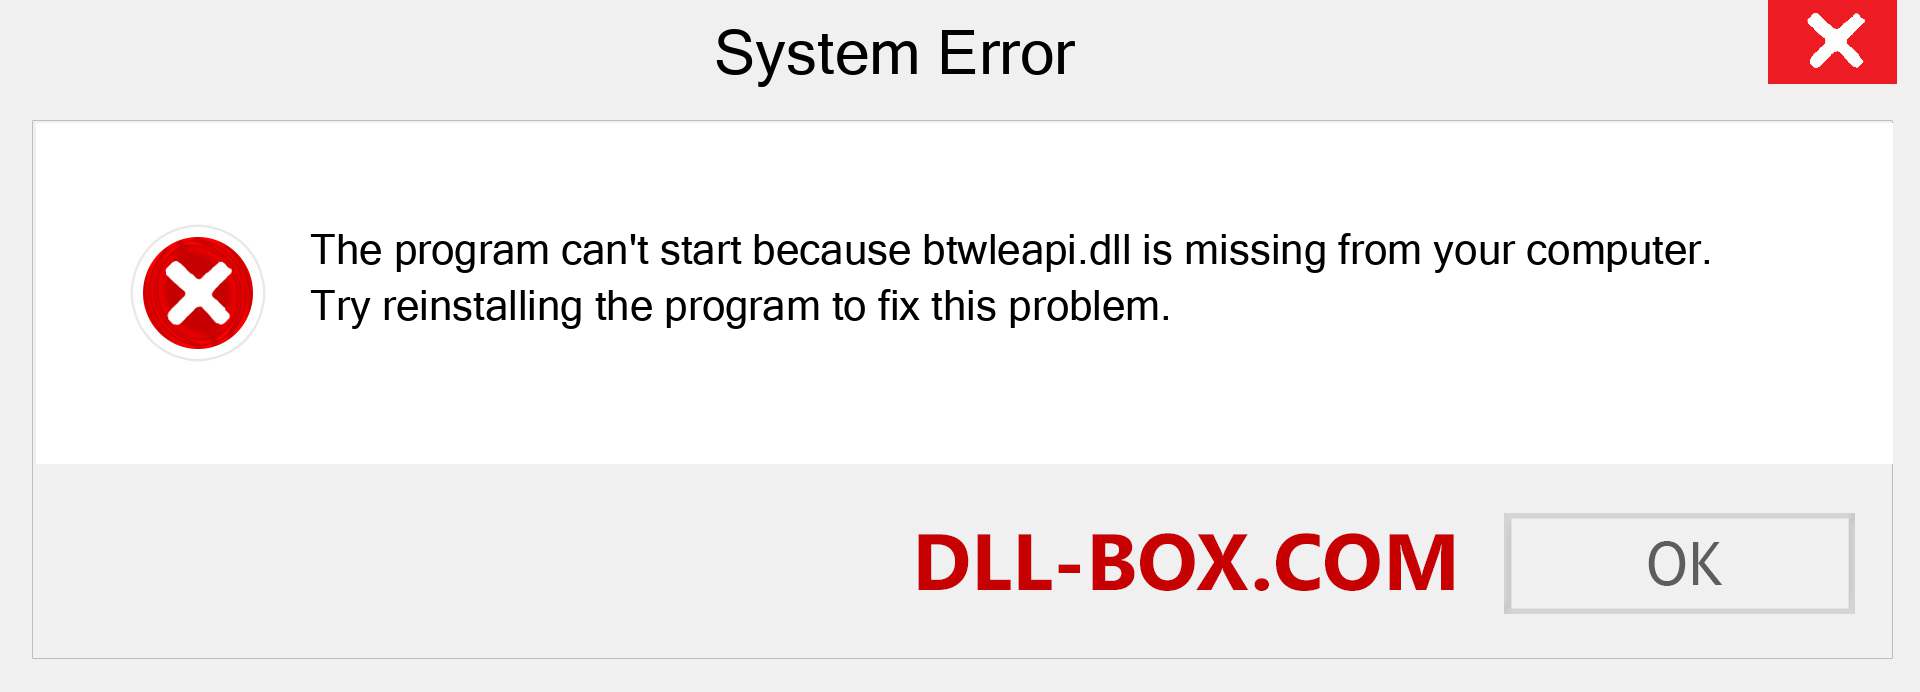  btwleapi.dll file is missing?. Download for Windows 7, 8, 10 - Fix  btwleapi dll Missing Error on Windows, photos, images